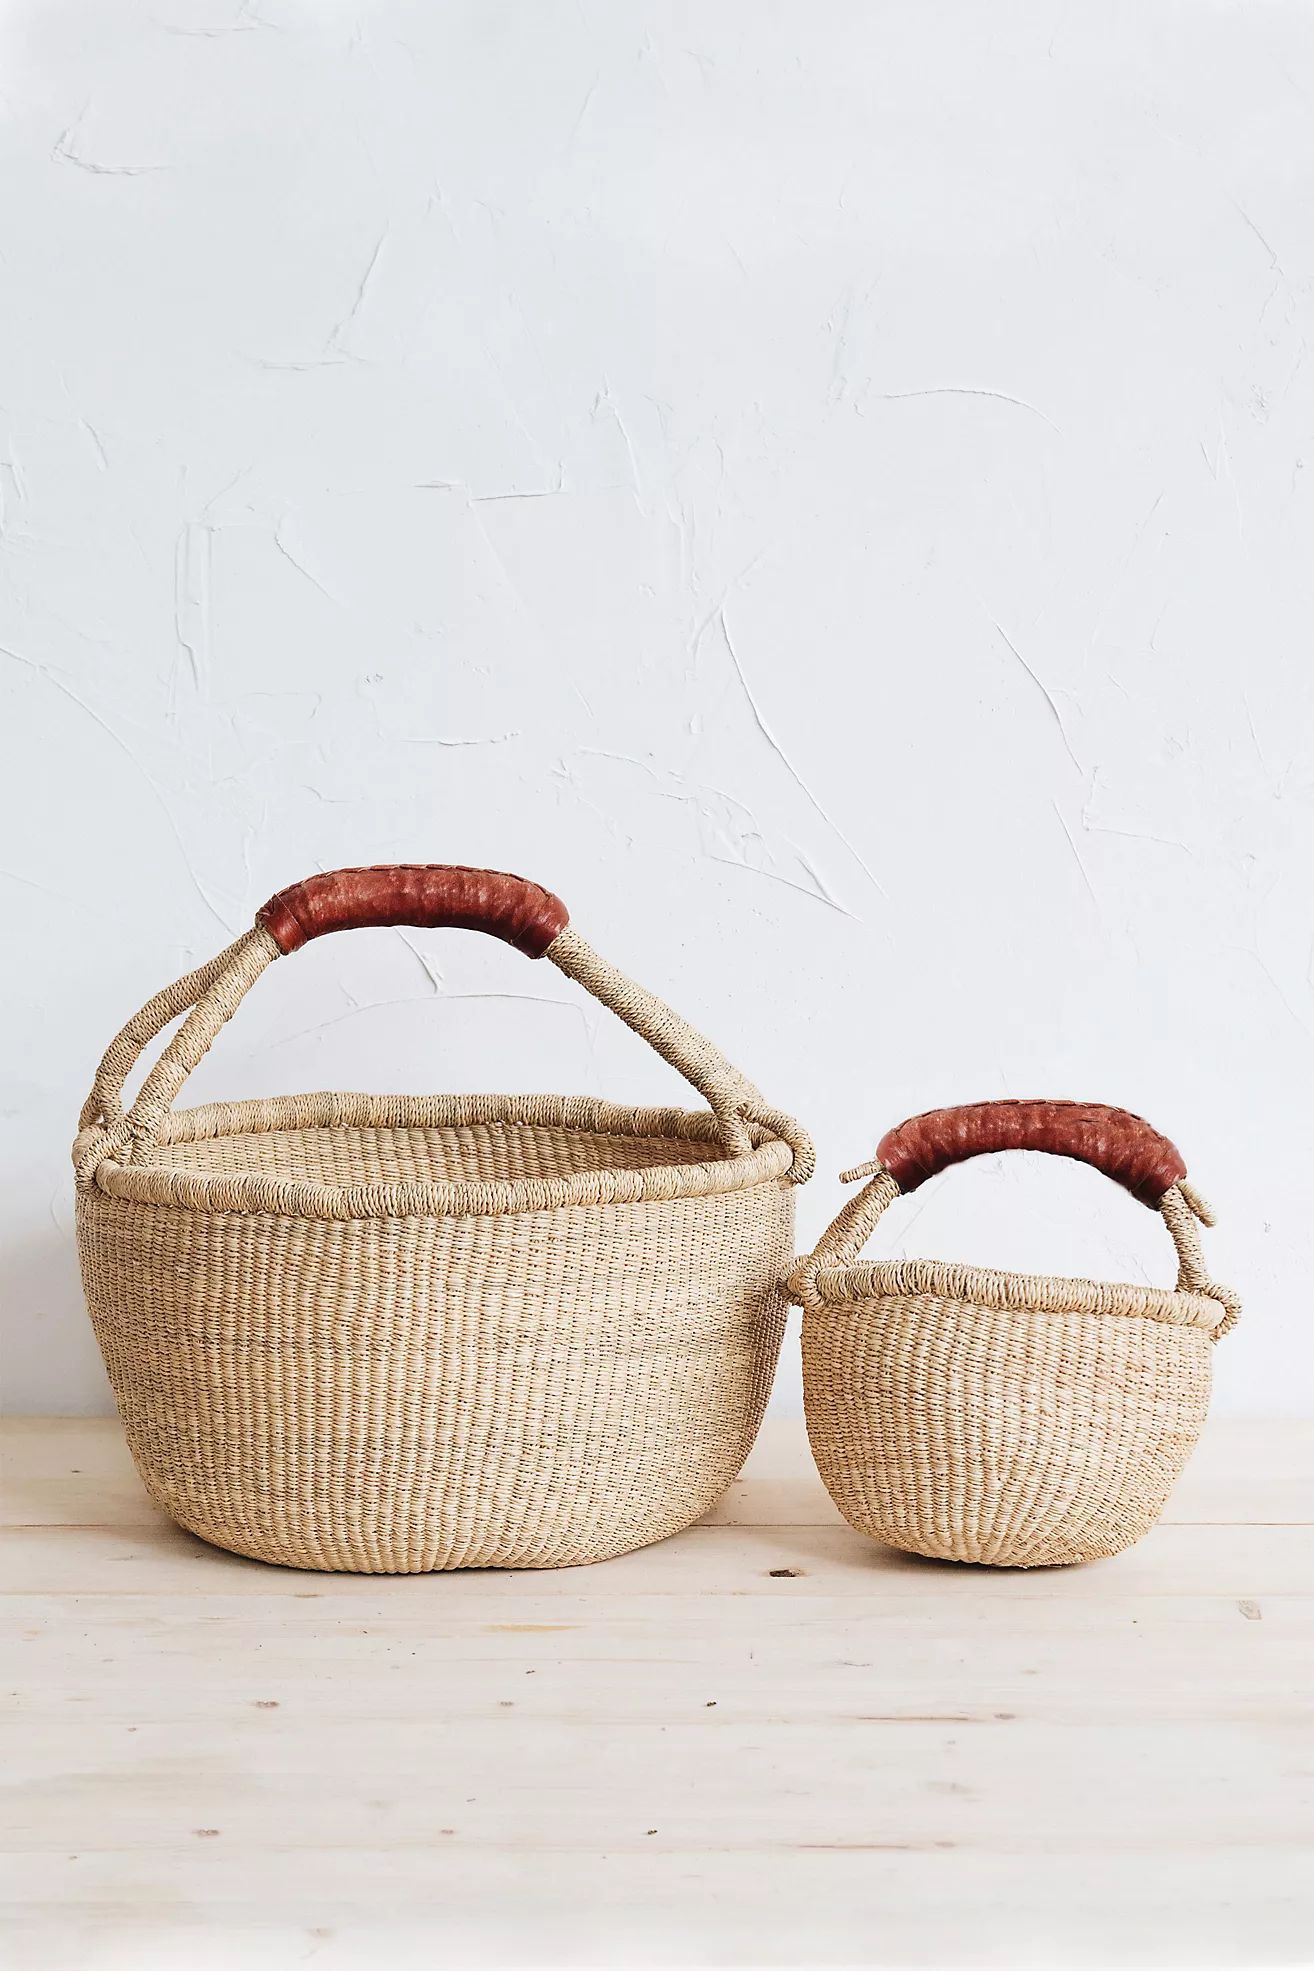 Connected Goods Lucy Bolga Basket | Anthropologie (US)